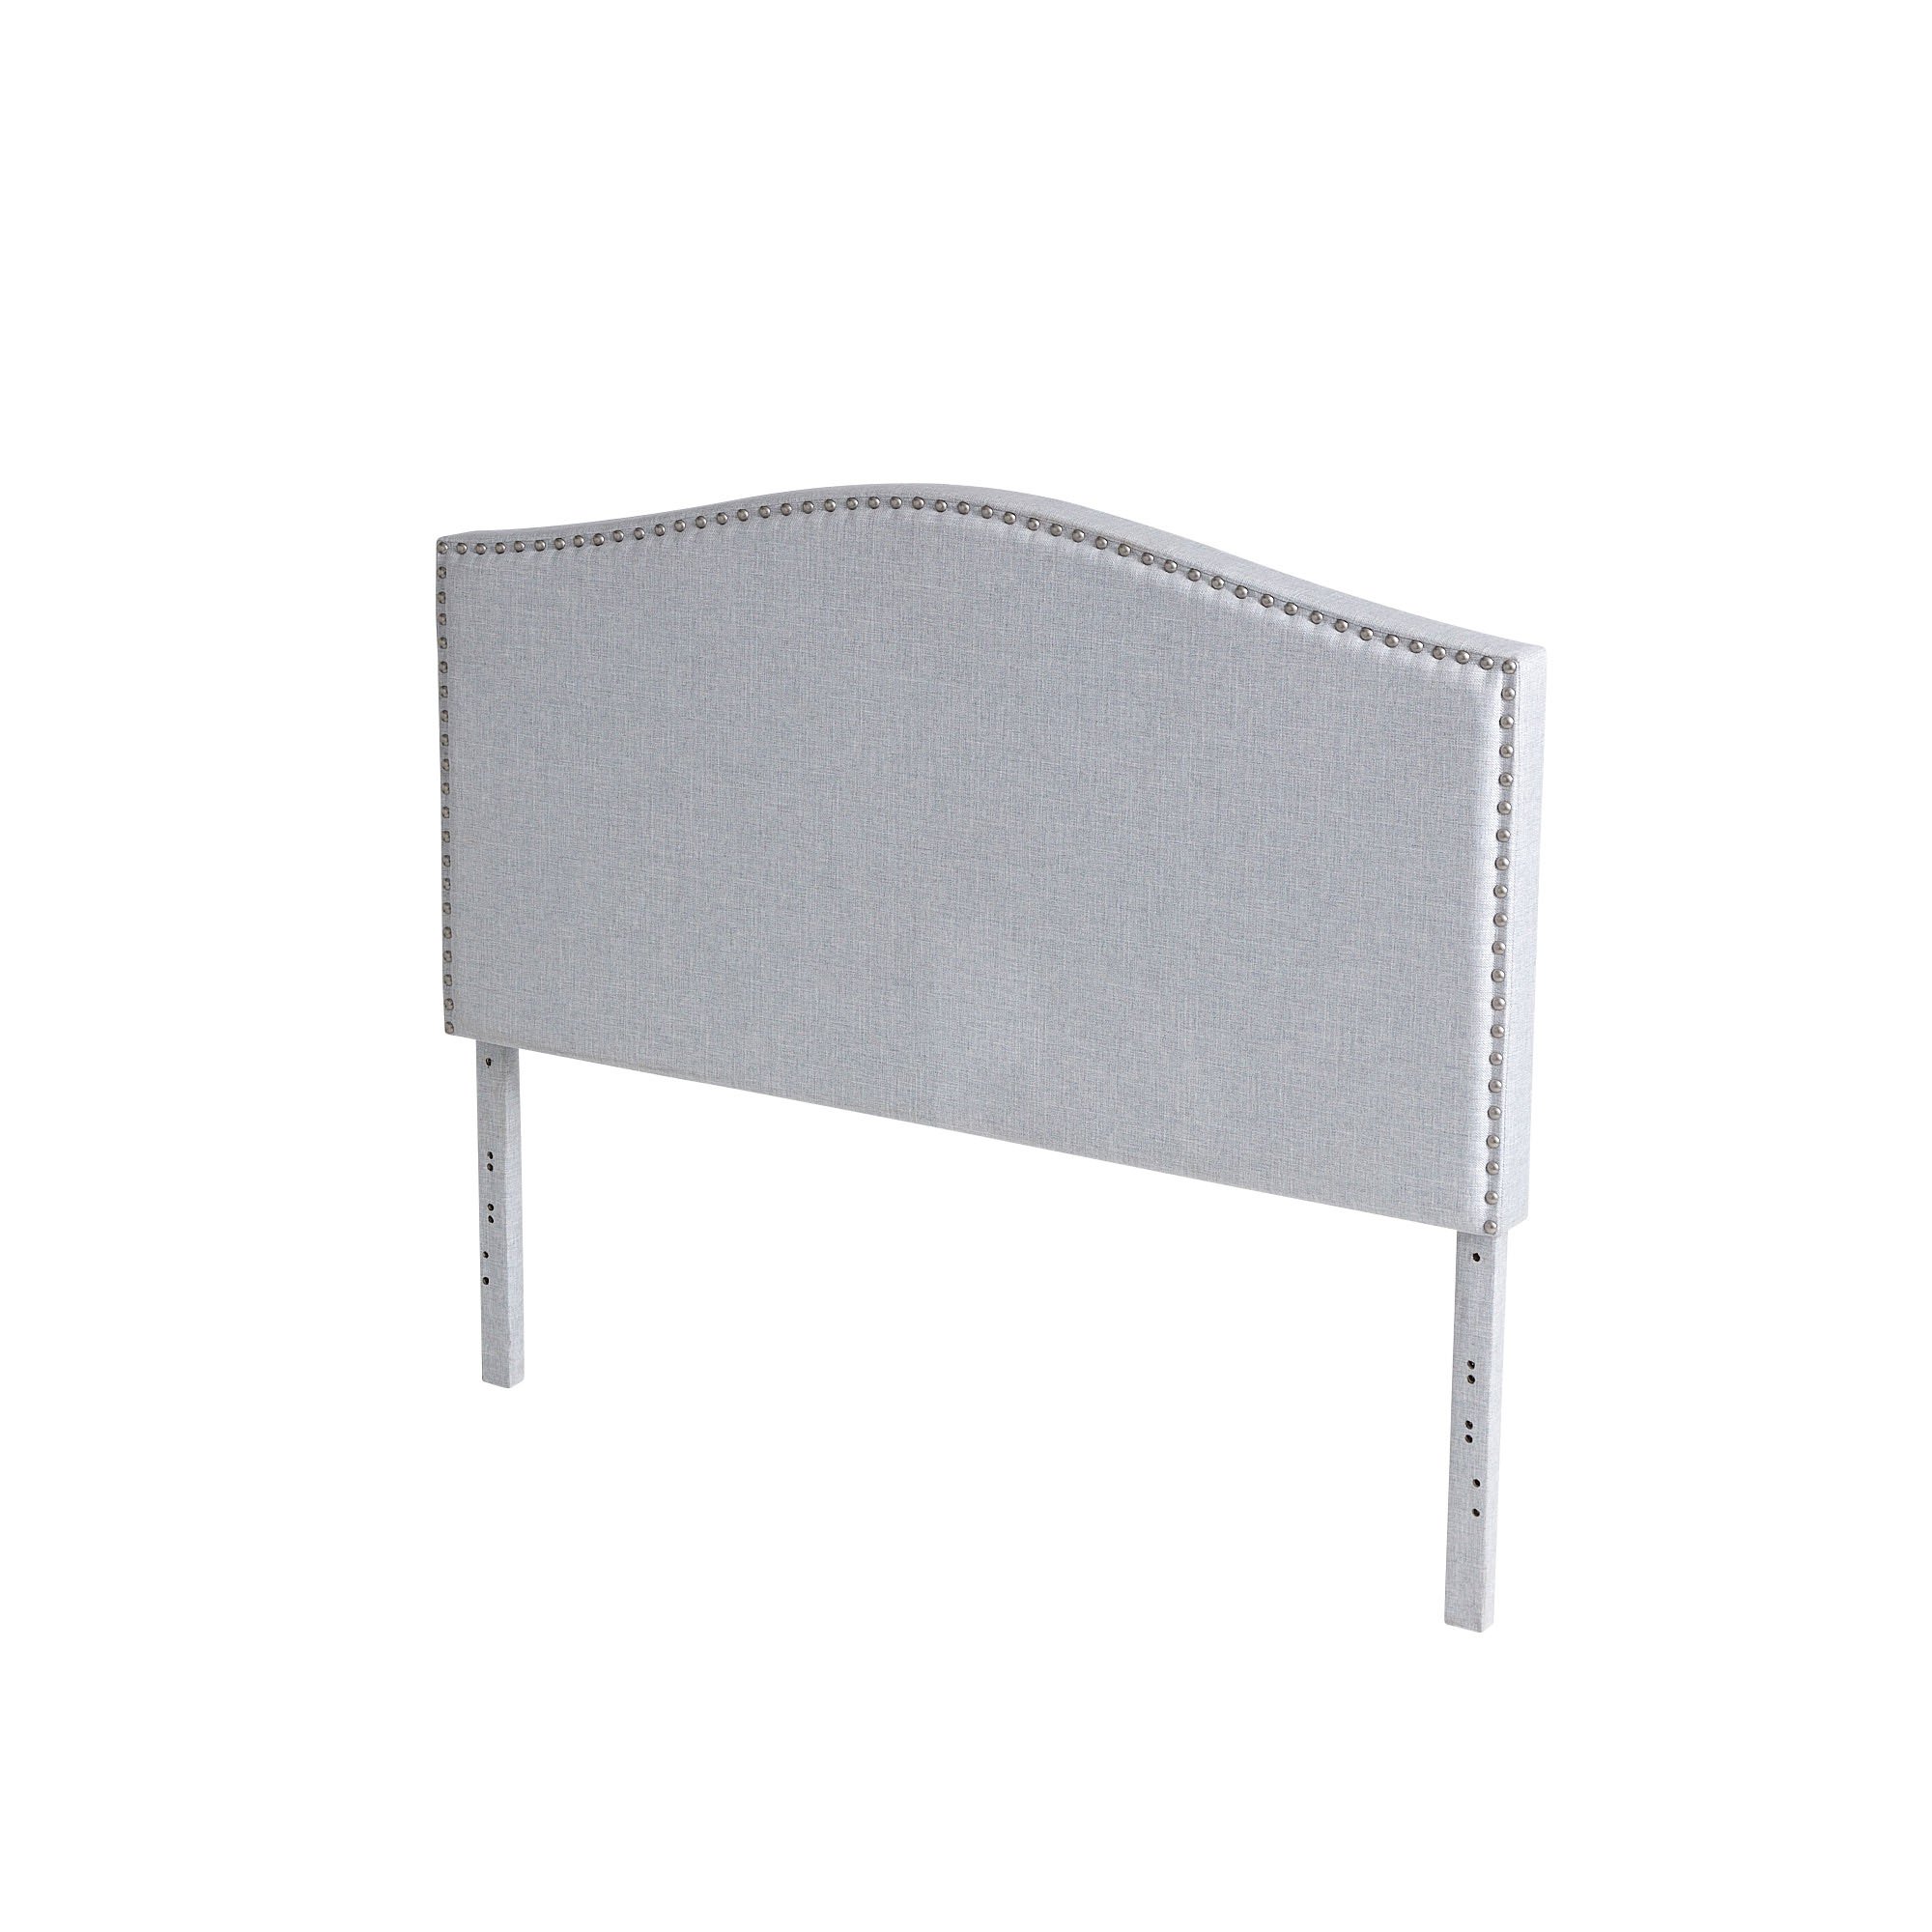 My Texas House Kennedy Curved Upholstered Headboard, King, Light 